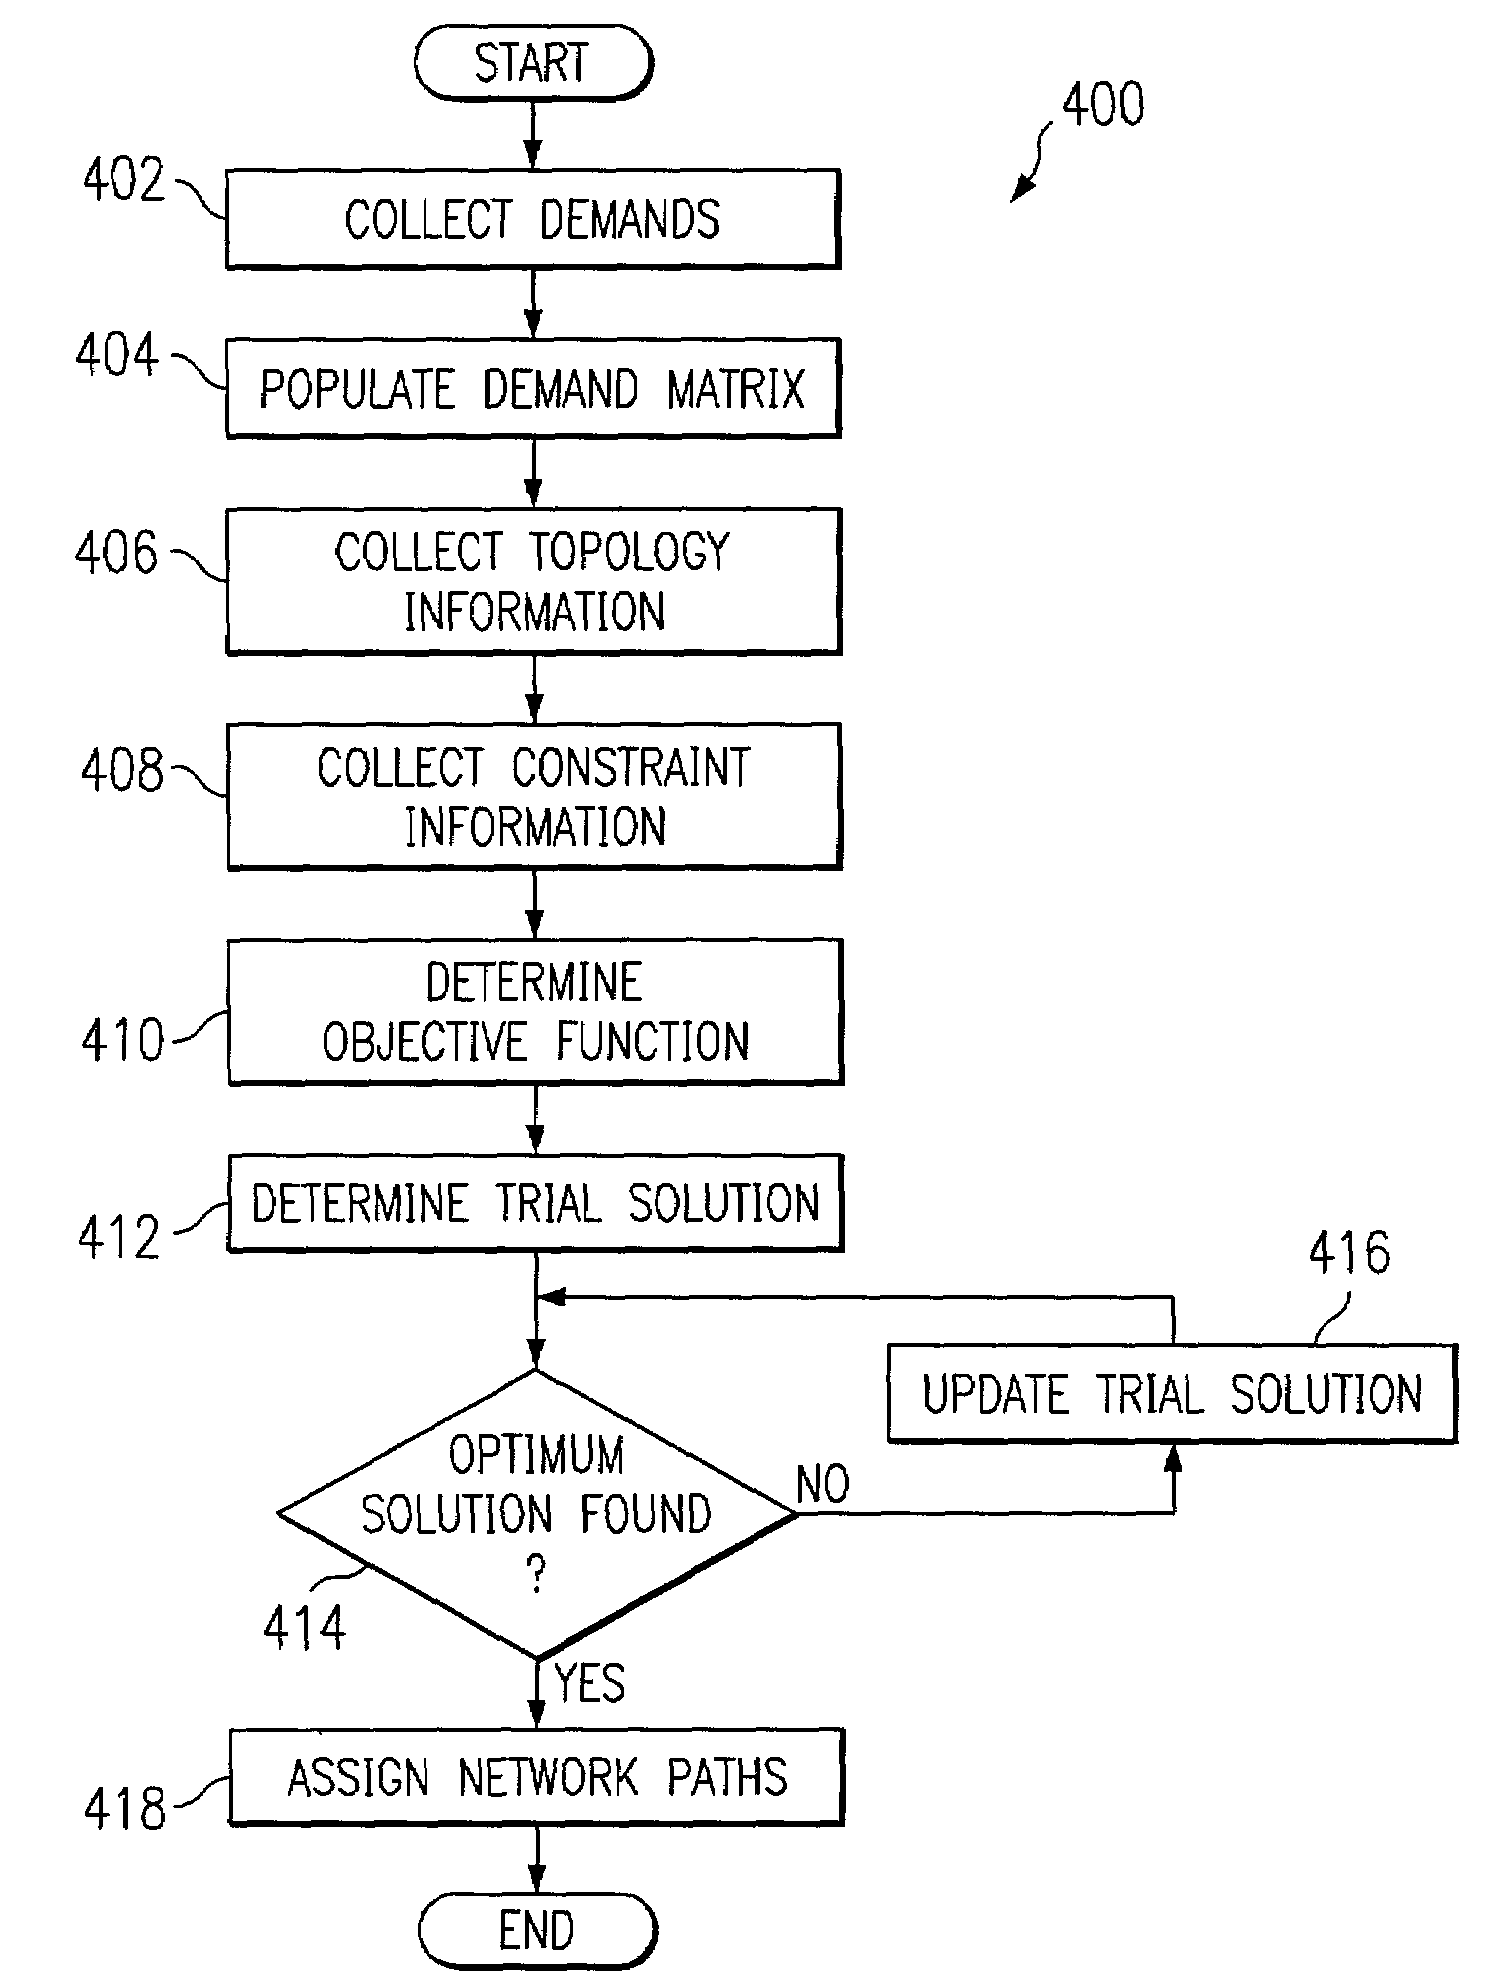 Optimizing path selection for multiple service classes in a network